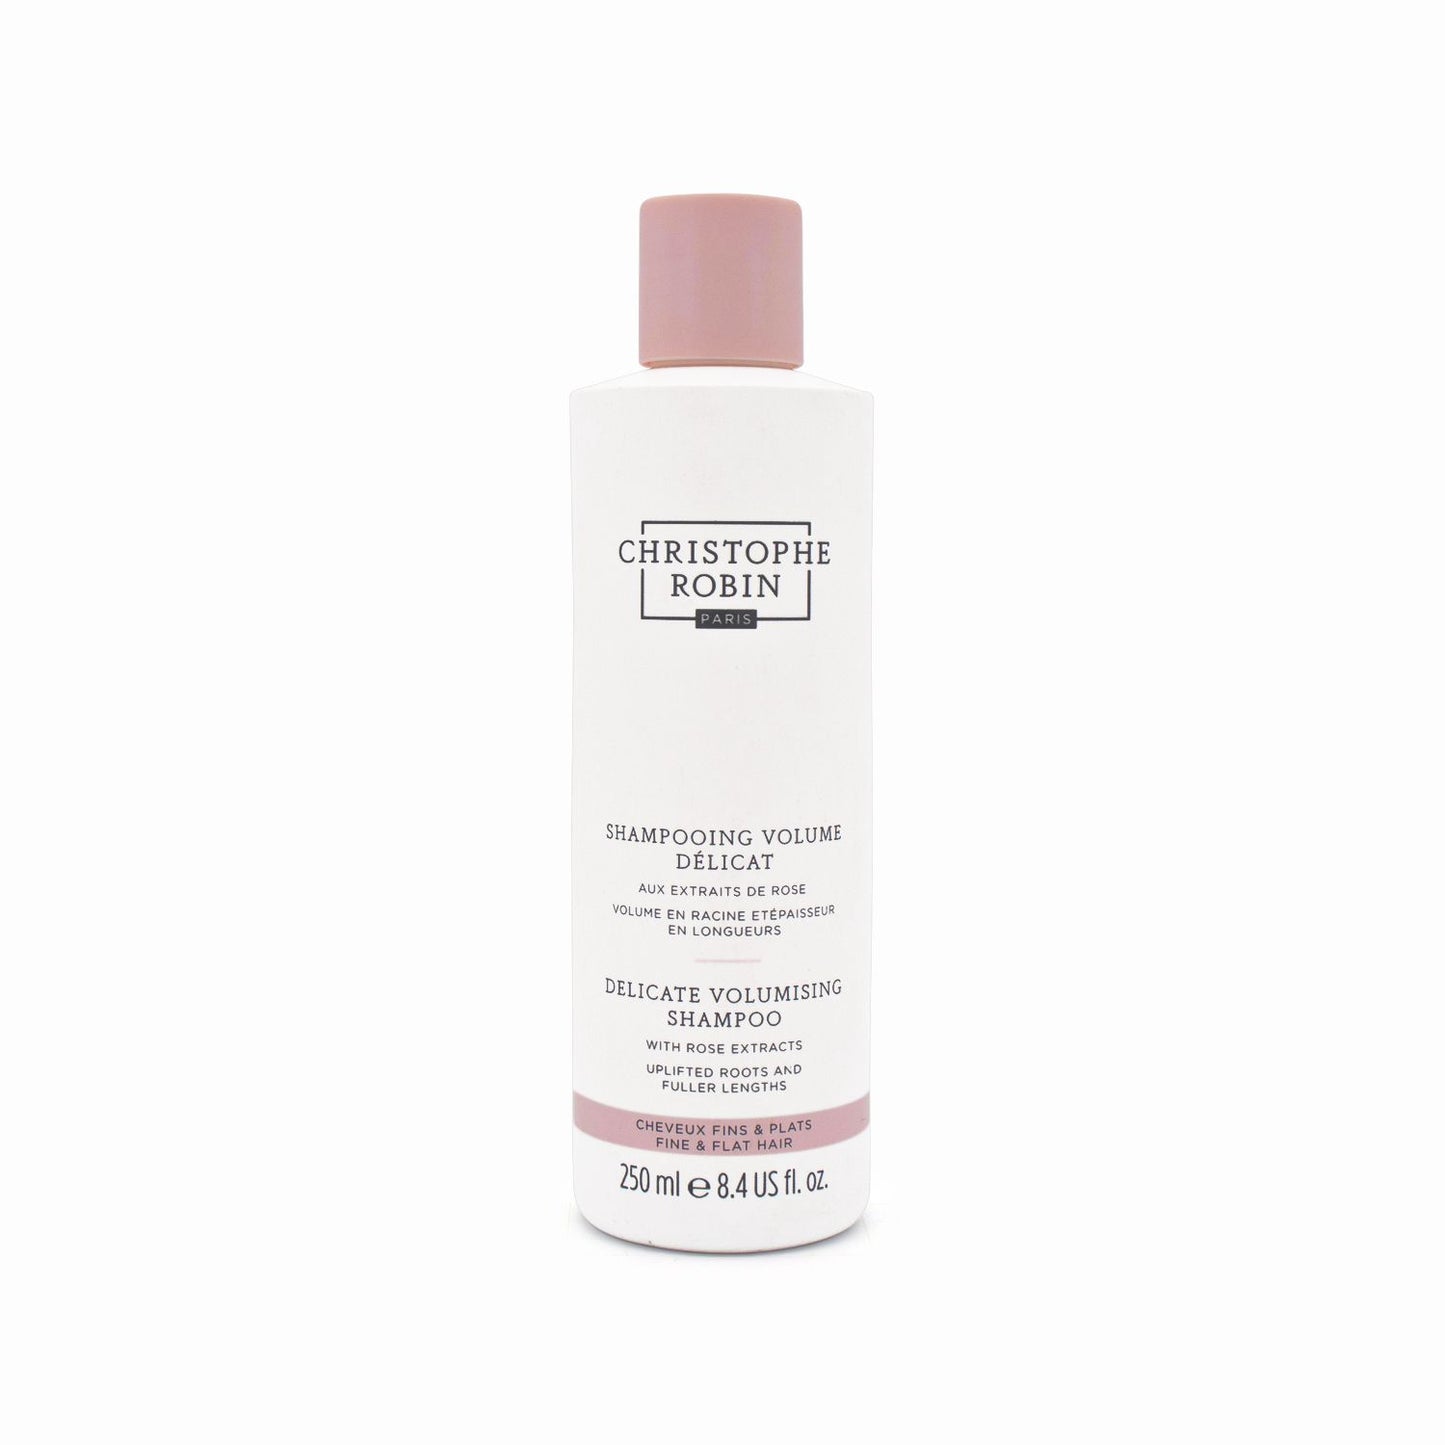 Christophe Robin Delicate Volumising Shampoo With Rose 250ml - Imperfect Container